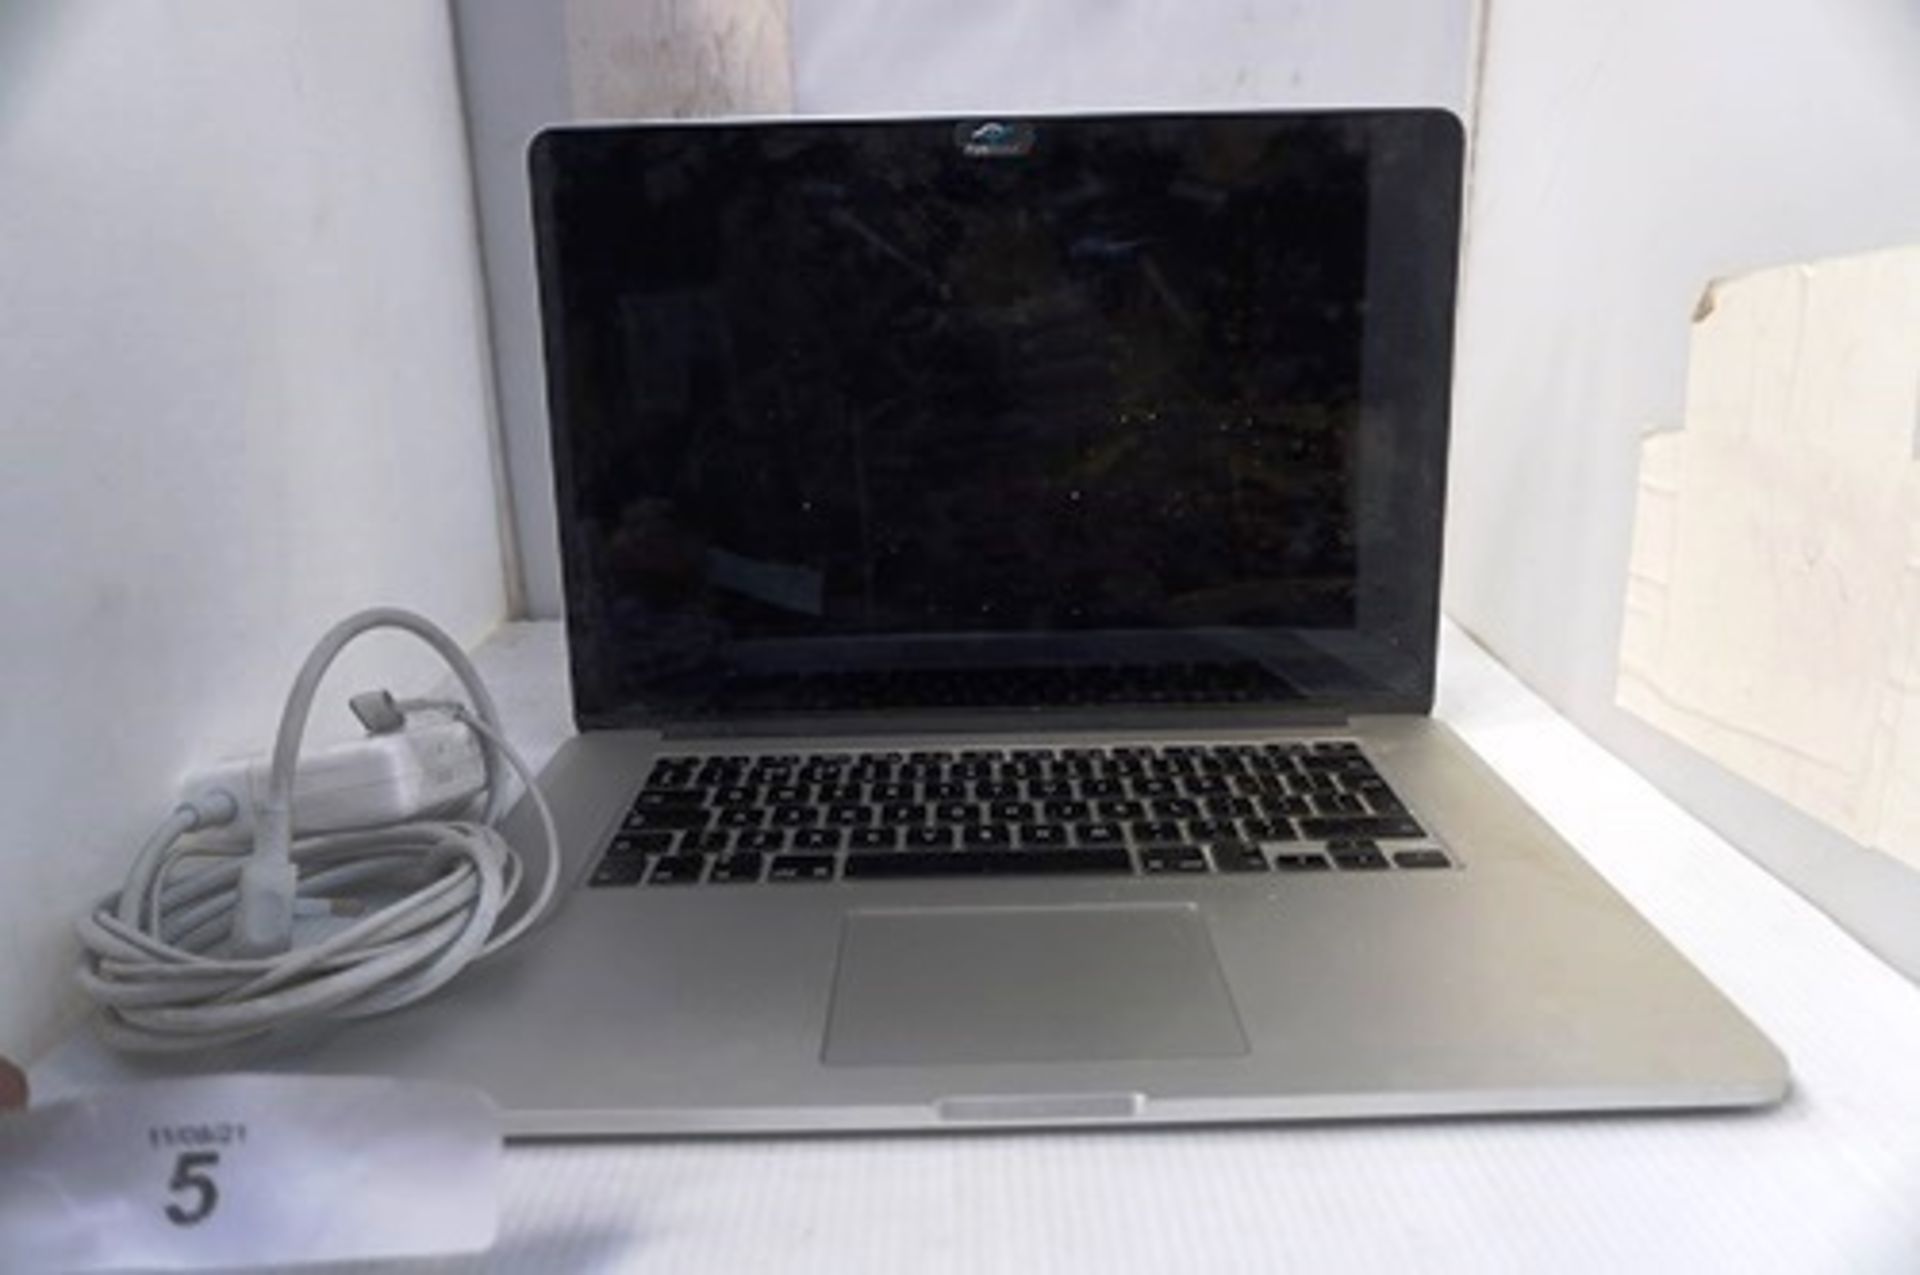 1 x Apple MacBook Pro A1398 laptop, with power cable, hard drive removed, powers on - Spares and